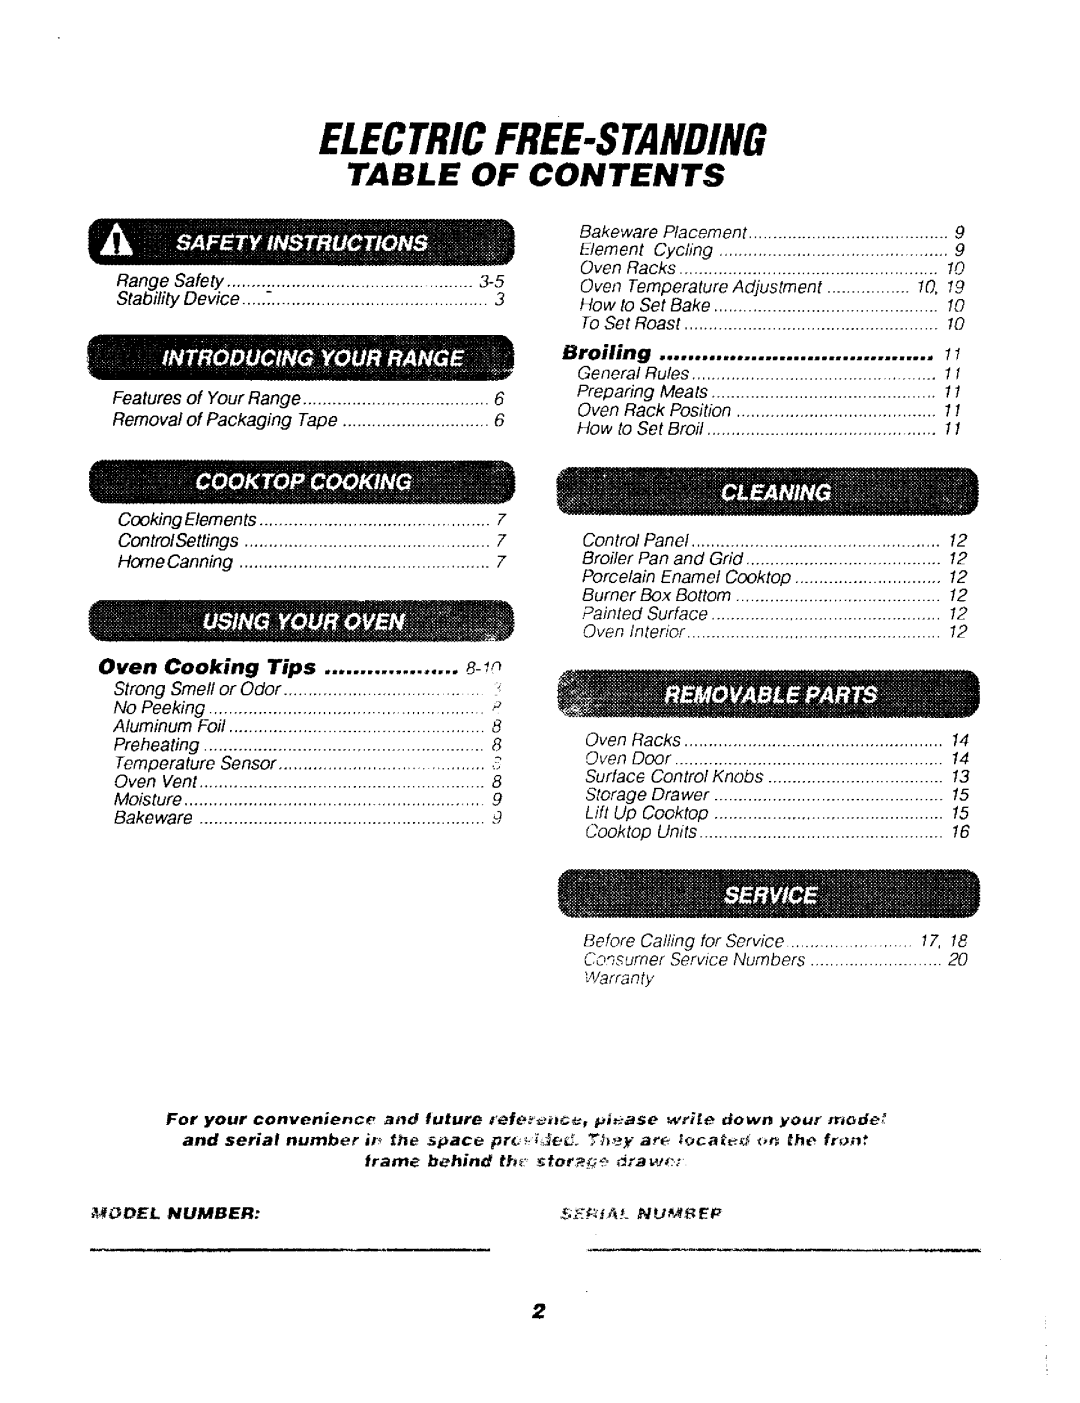 Sears 911. 62048, 911. 62078, 911. 62071, 911. 62041 owner manual Electricfree-Standing, Table Of Contents 